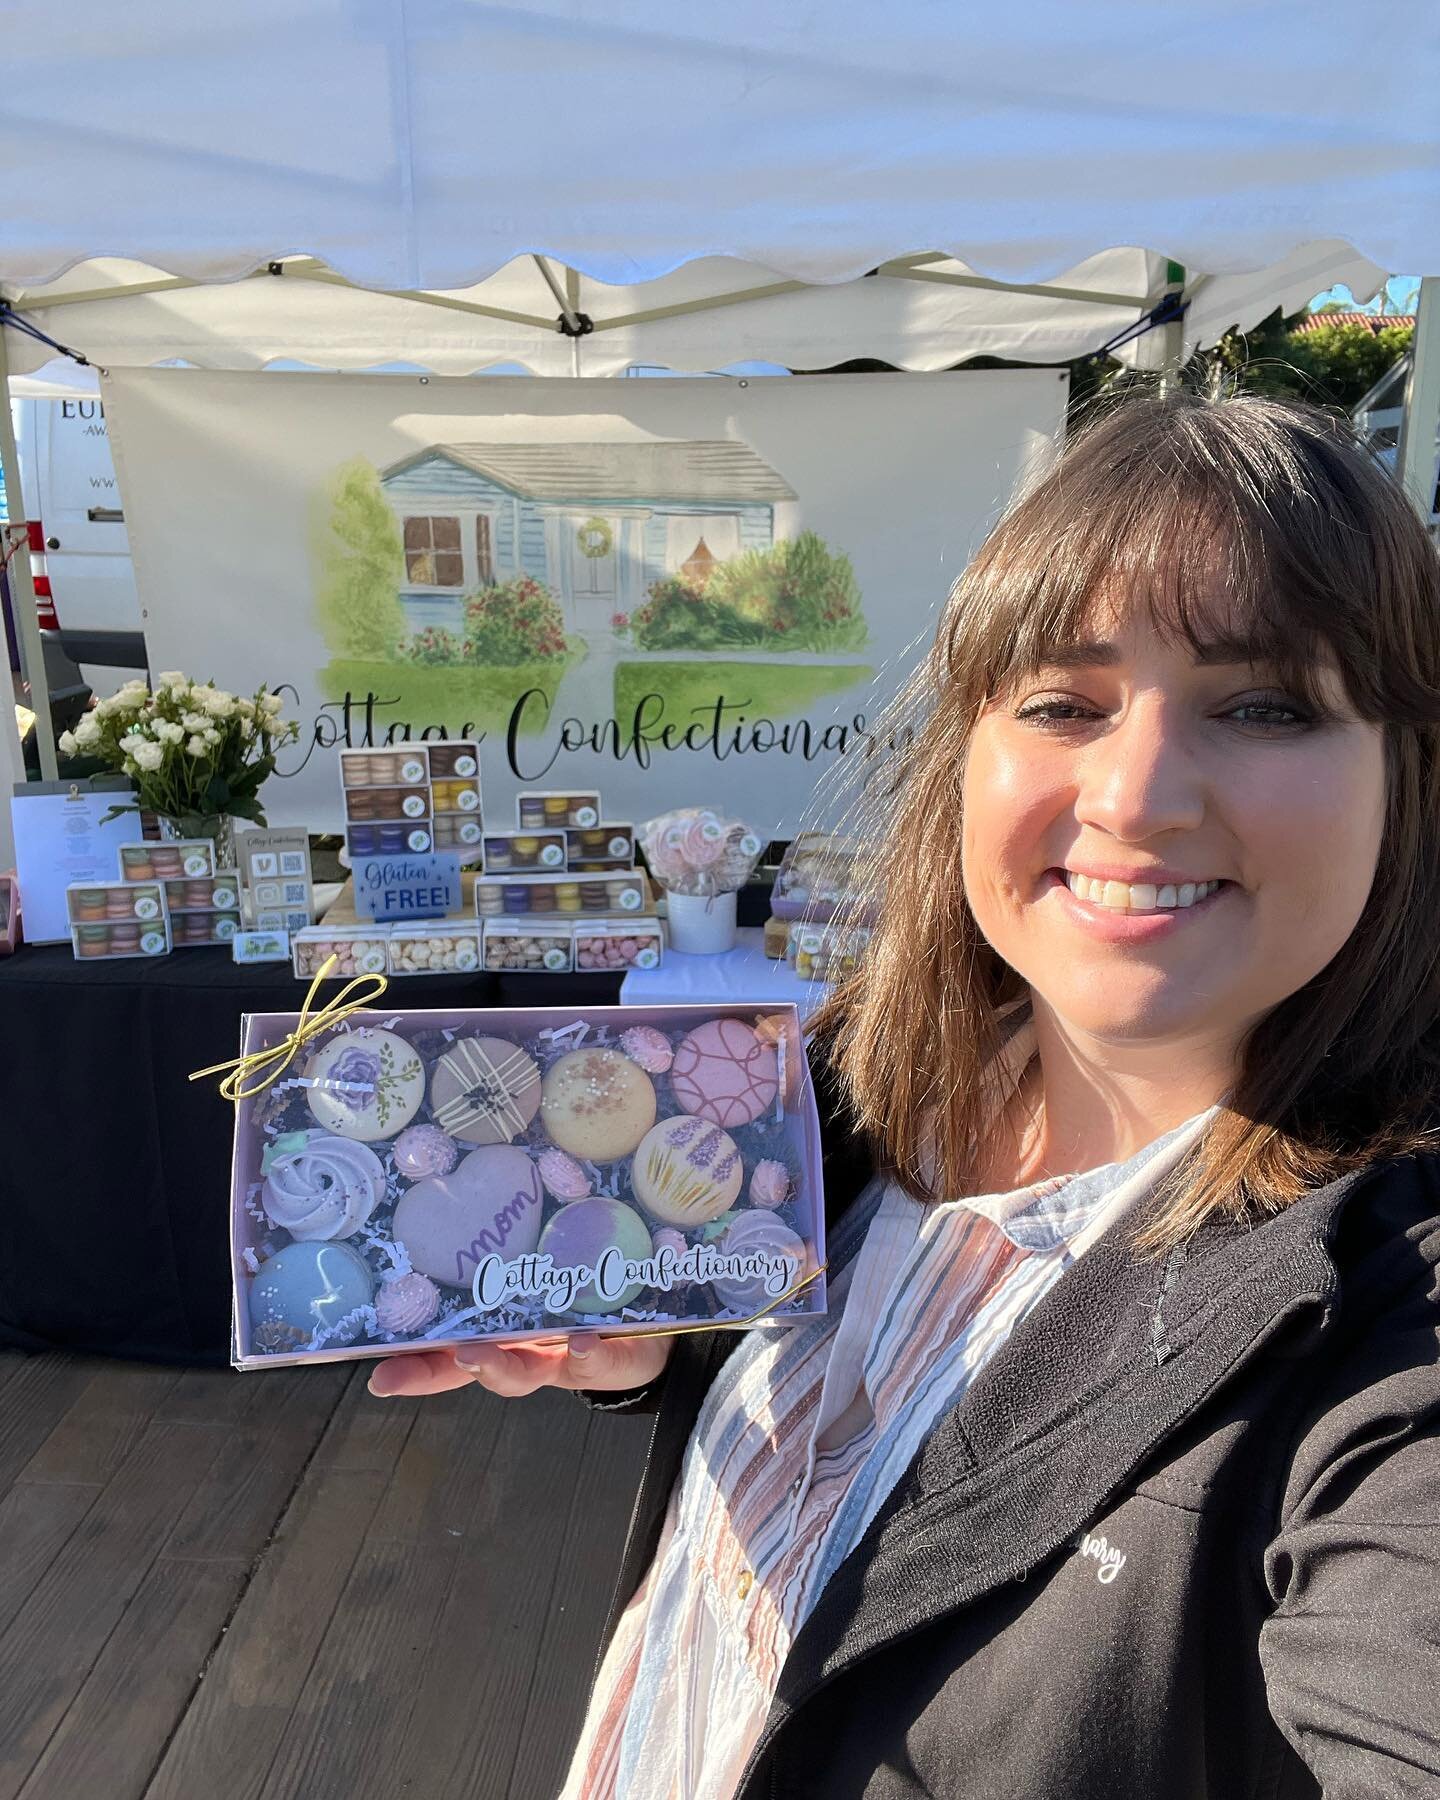 Market Day is here! 

I have both the new Let&rsquo;s Do Brunch Pack as well as the Mother&rsquo;s Day Gift Sets available today! Come on down to the Calabasas Farmer&rsquo;s Market from 8 am - 1 pm to get yours today! 
.
.
.
.
.
#calabasasfarmersmar